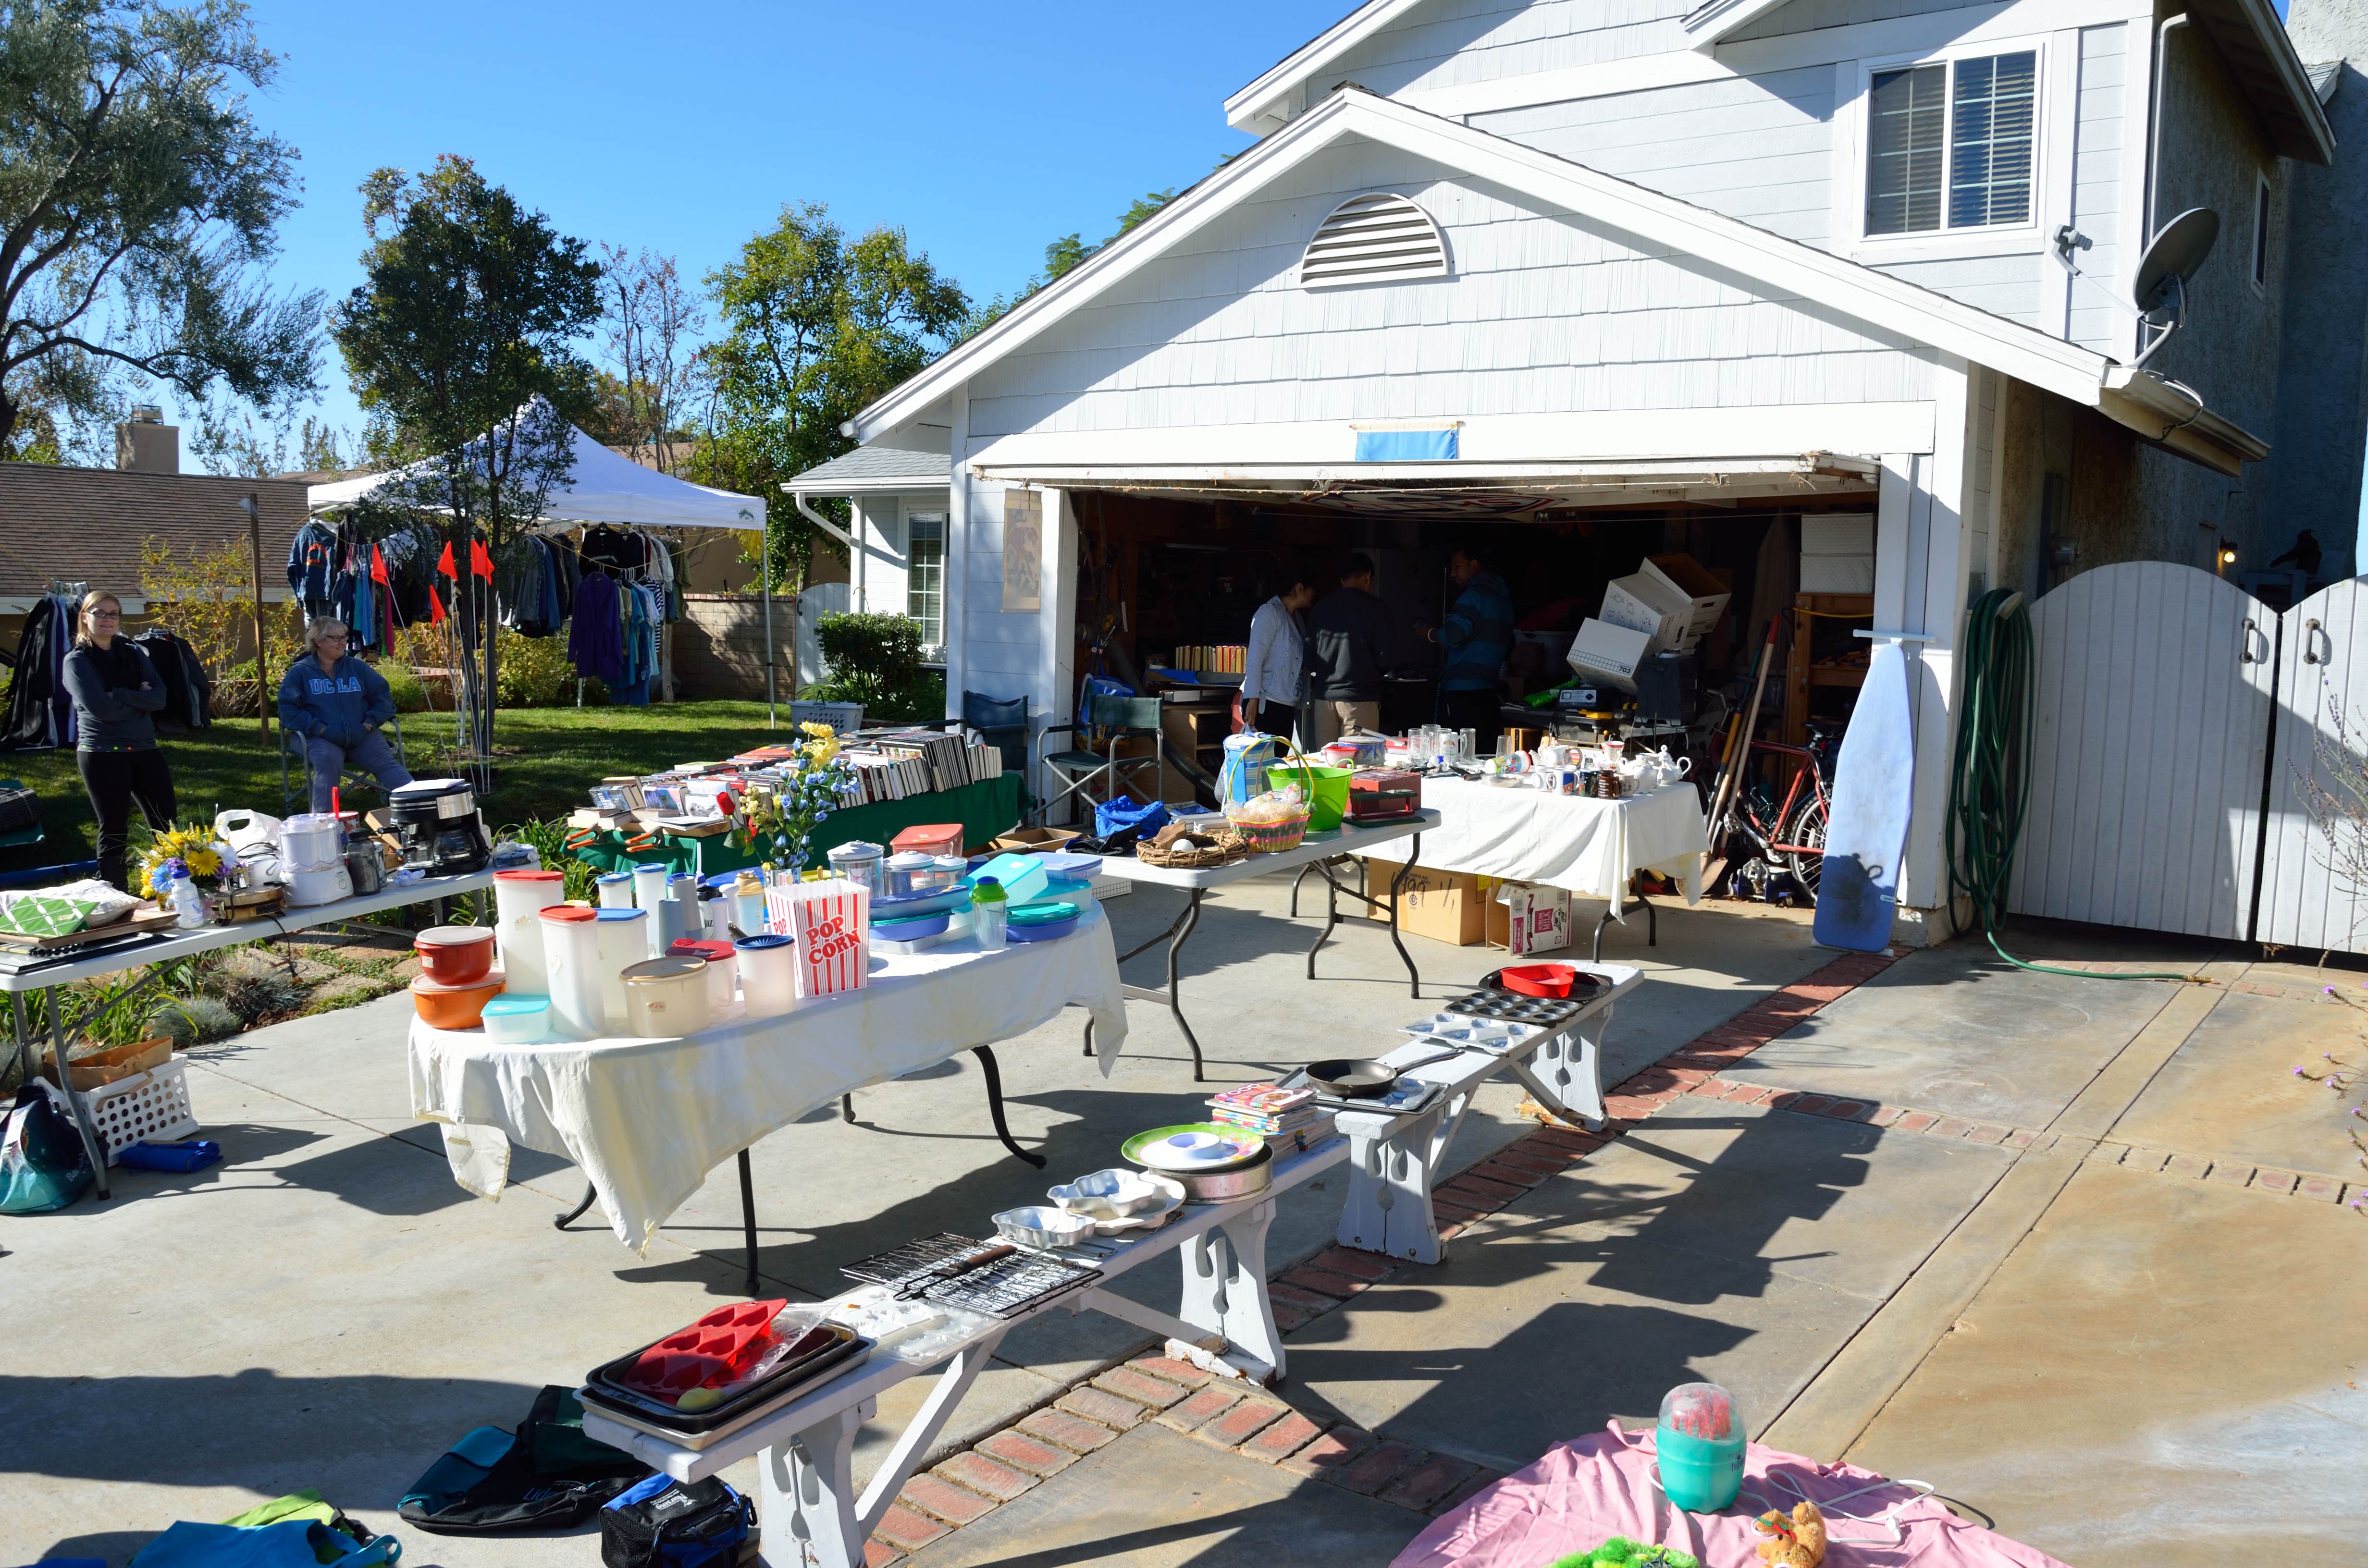 Dates Set for Albertville Citywide Garage Sales North Wright County Today